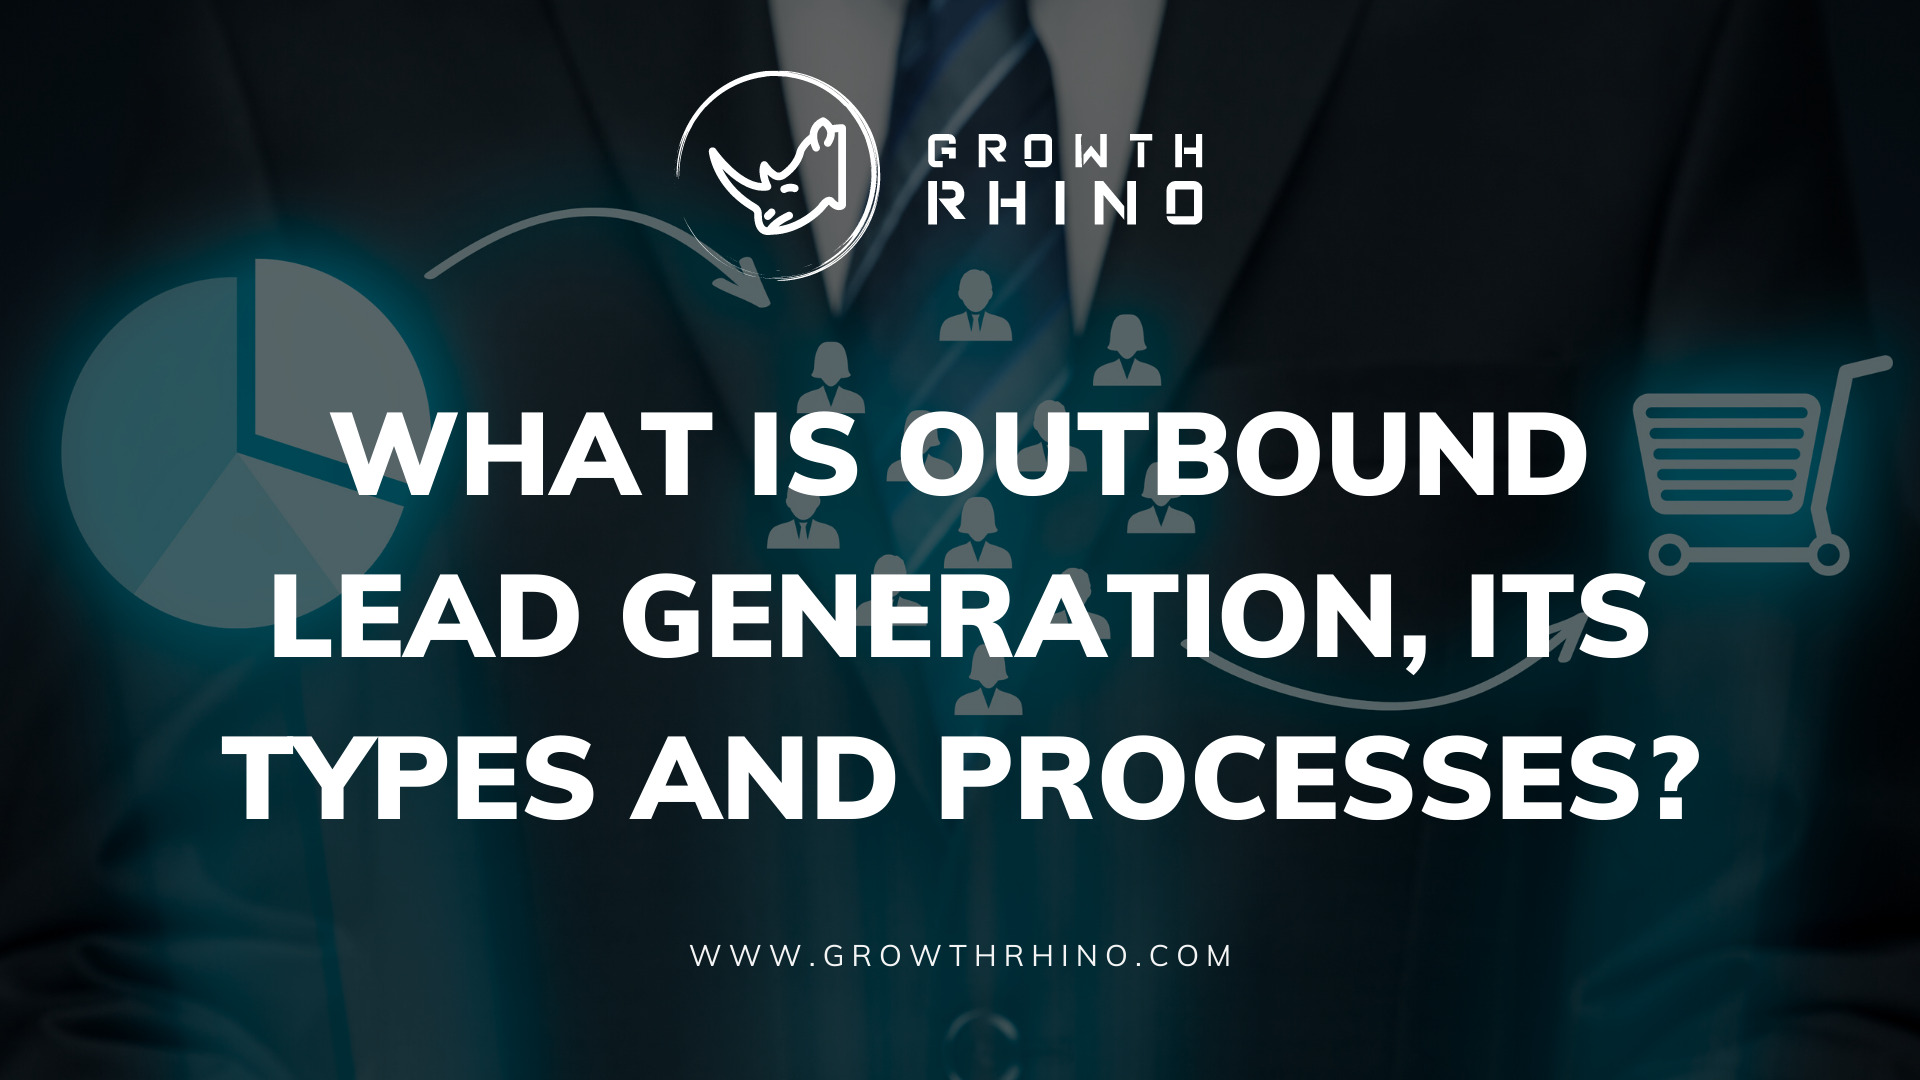 What is Outbound Lead Generation, its Types and Processes?